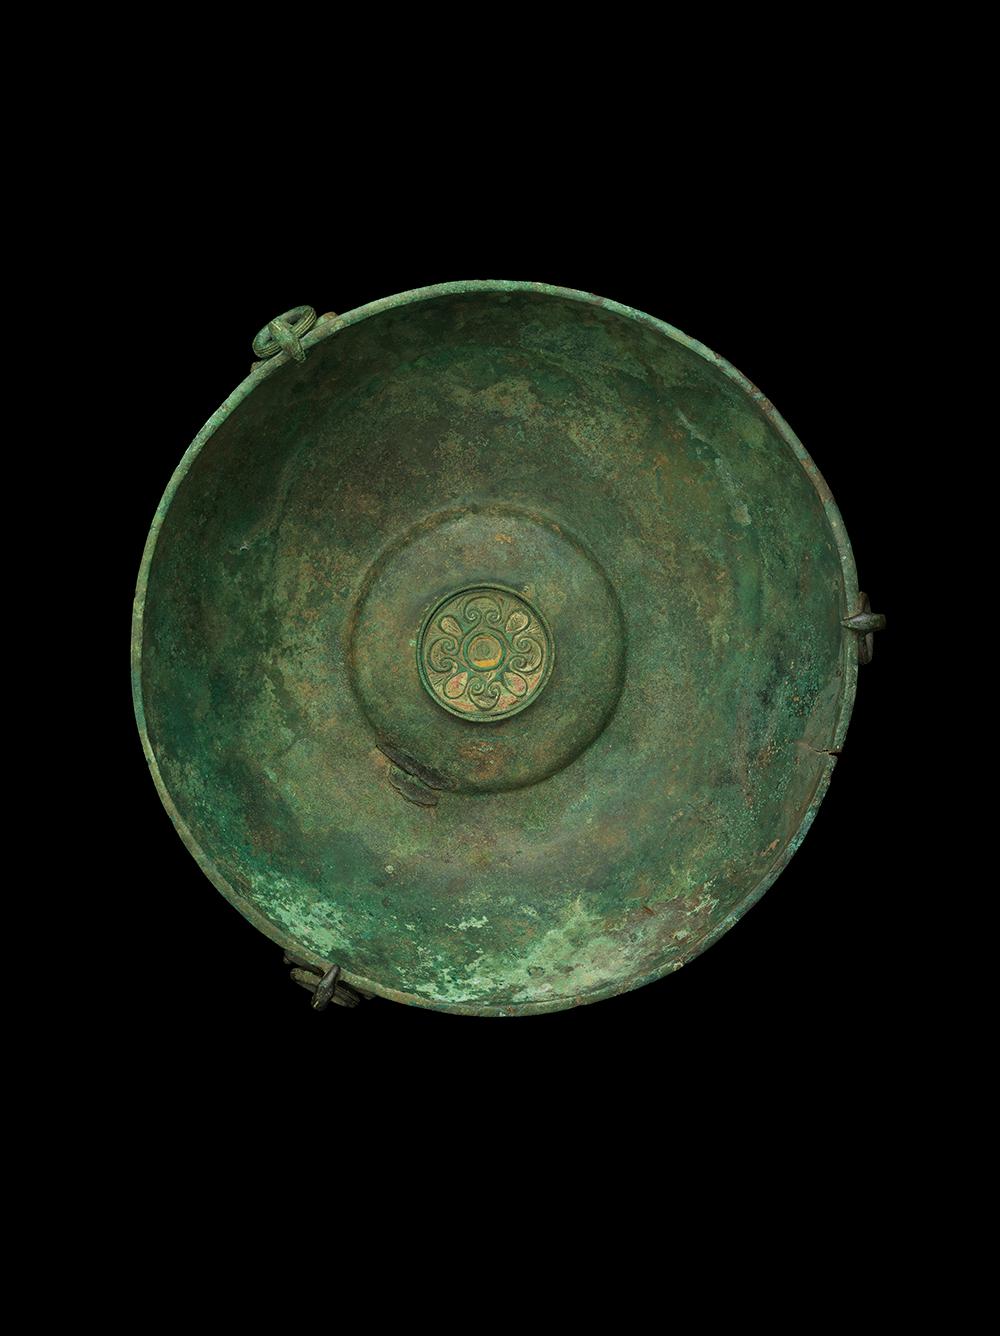 A very rare and near-complete copper-alloy hanging bowl and associated fittings. Crafted from a single sheet of bronze, the body of the bowl is curved, with a slightly recessed lip. The bowl features three matching hooked escutcheons and suspension